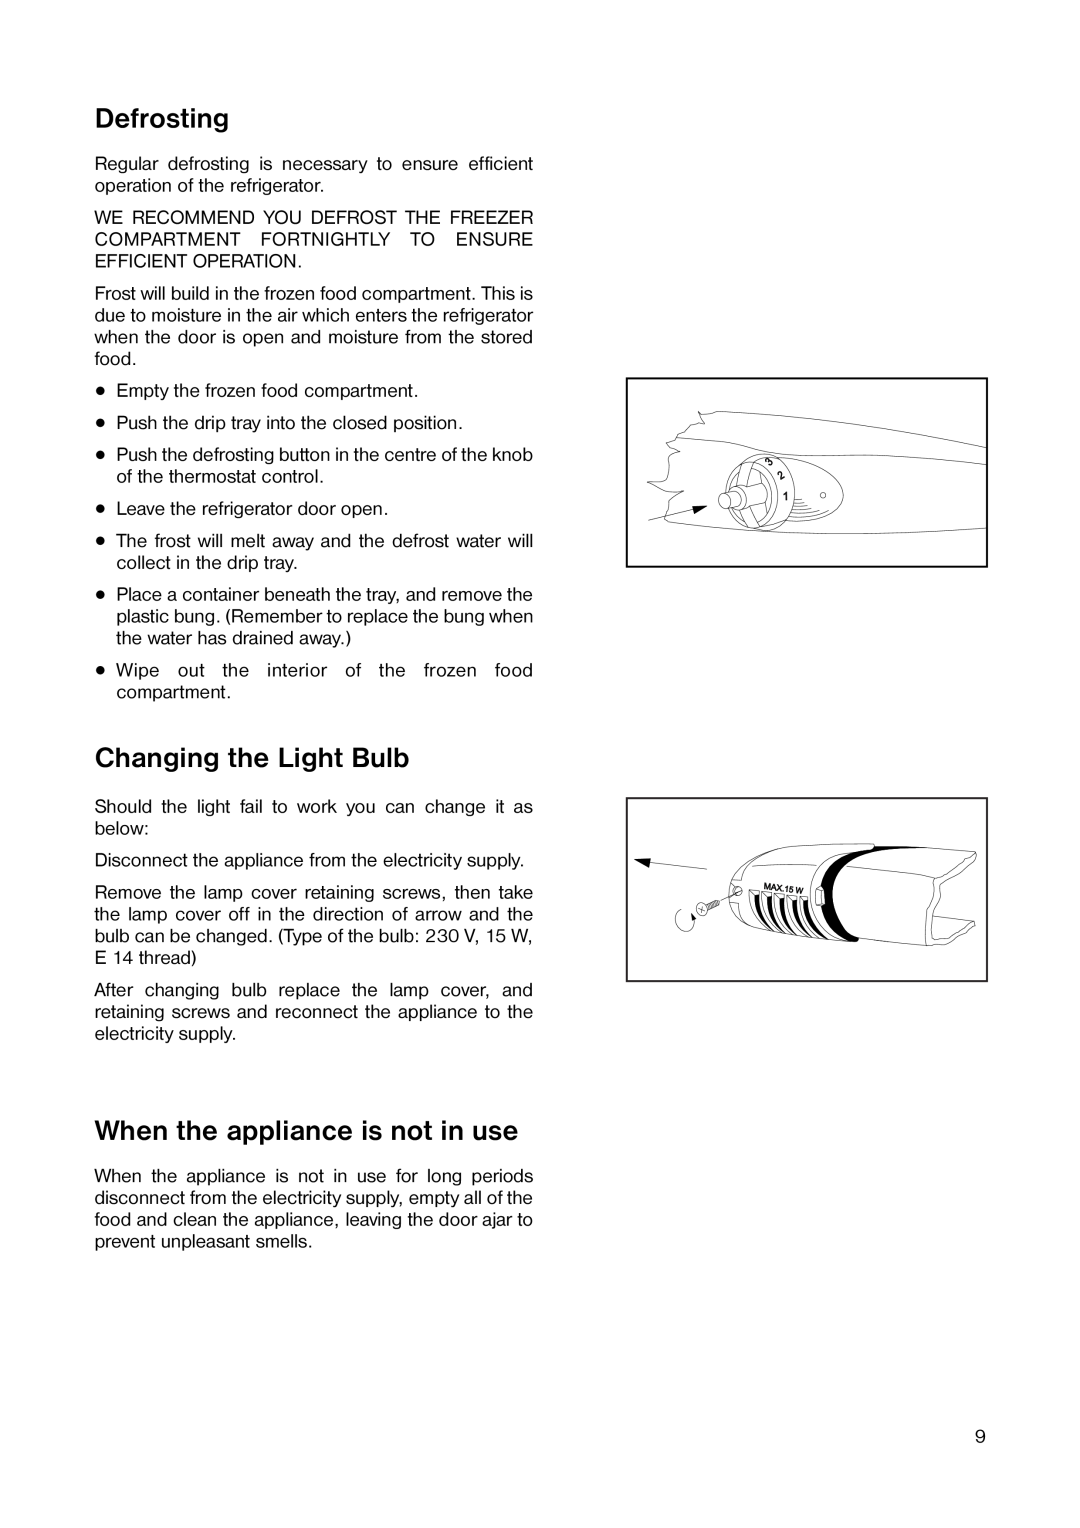 Tricity Bendix TB 58 R installation instructions Defrosting, Changing the Light Bulb, When the appliance is not in use 